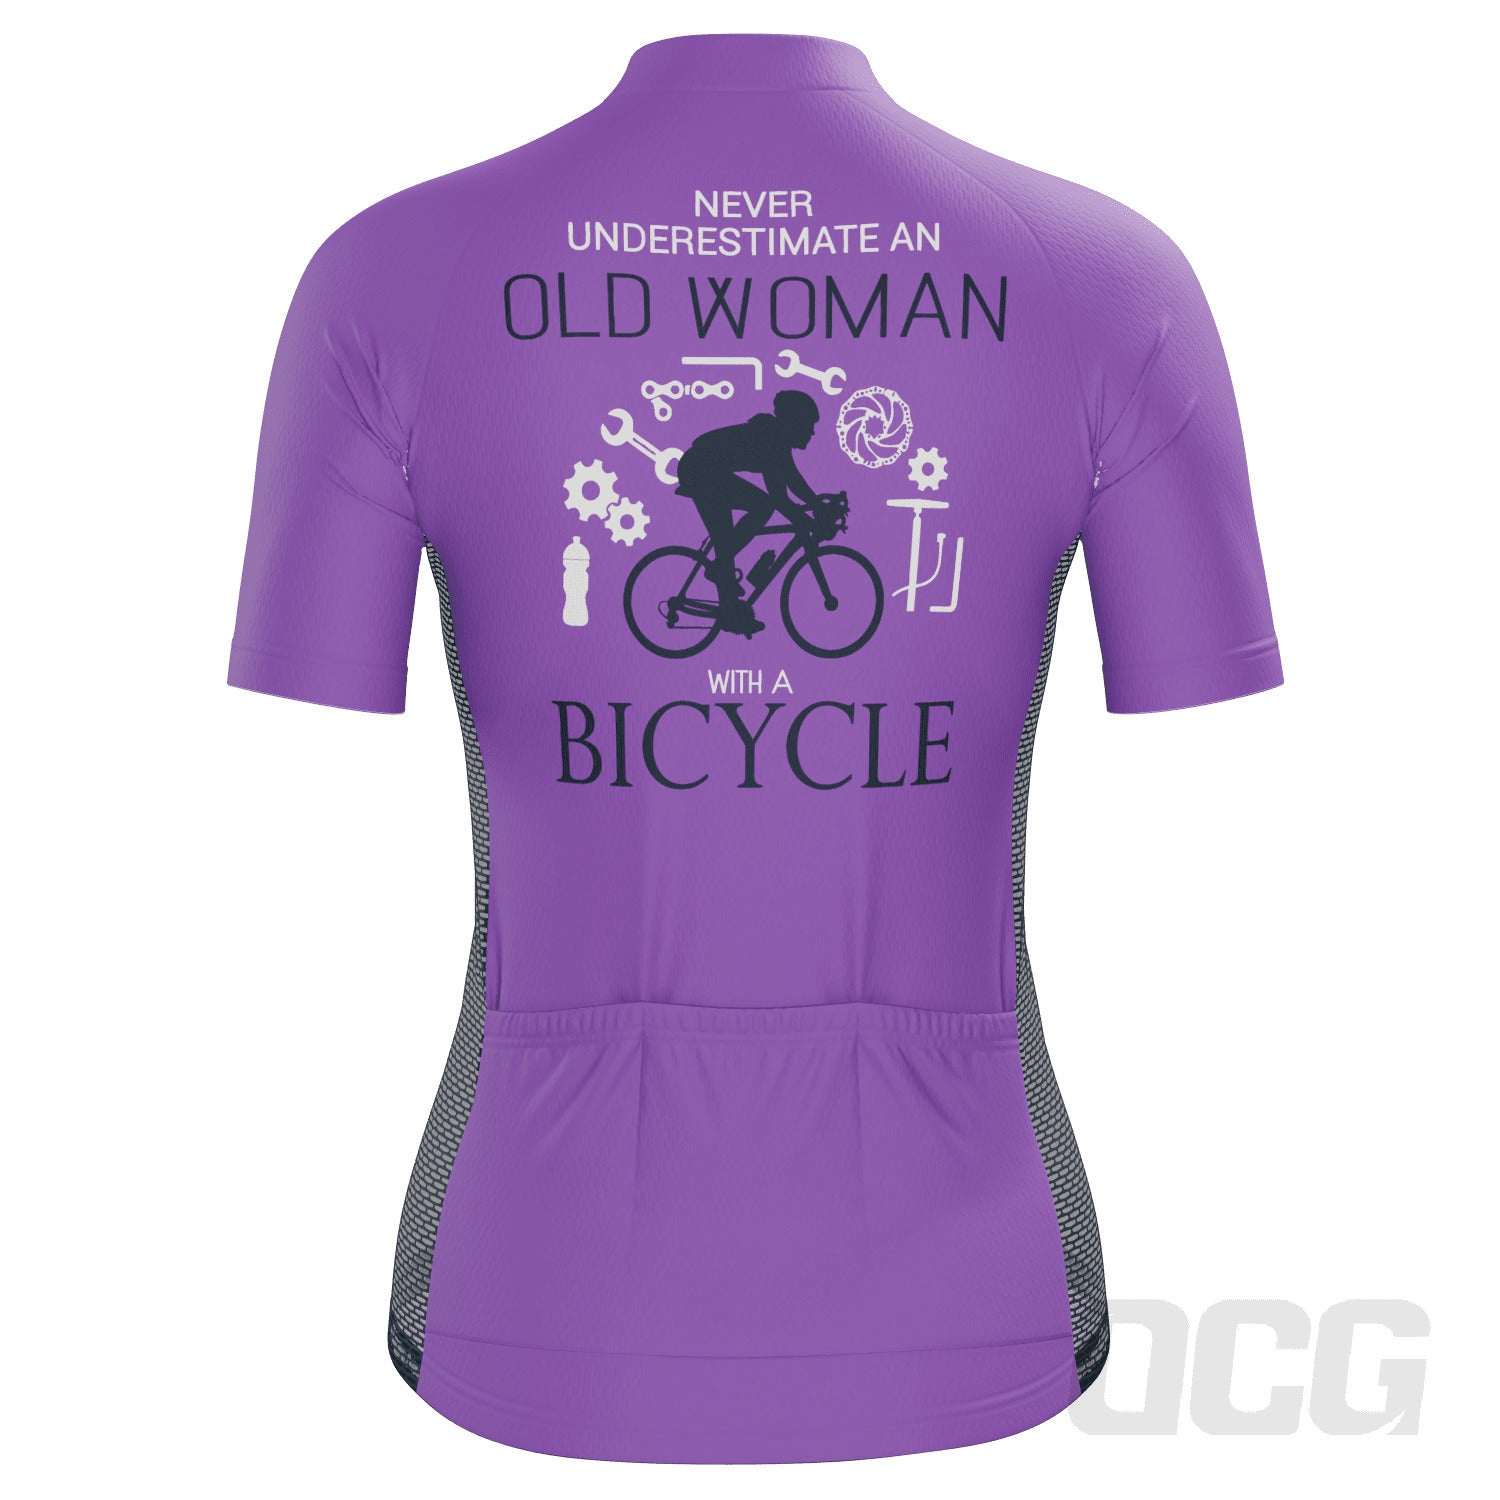 Women's Never Underestimate an Old Woman Short Sleeve Cycling Jersey